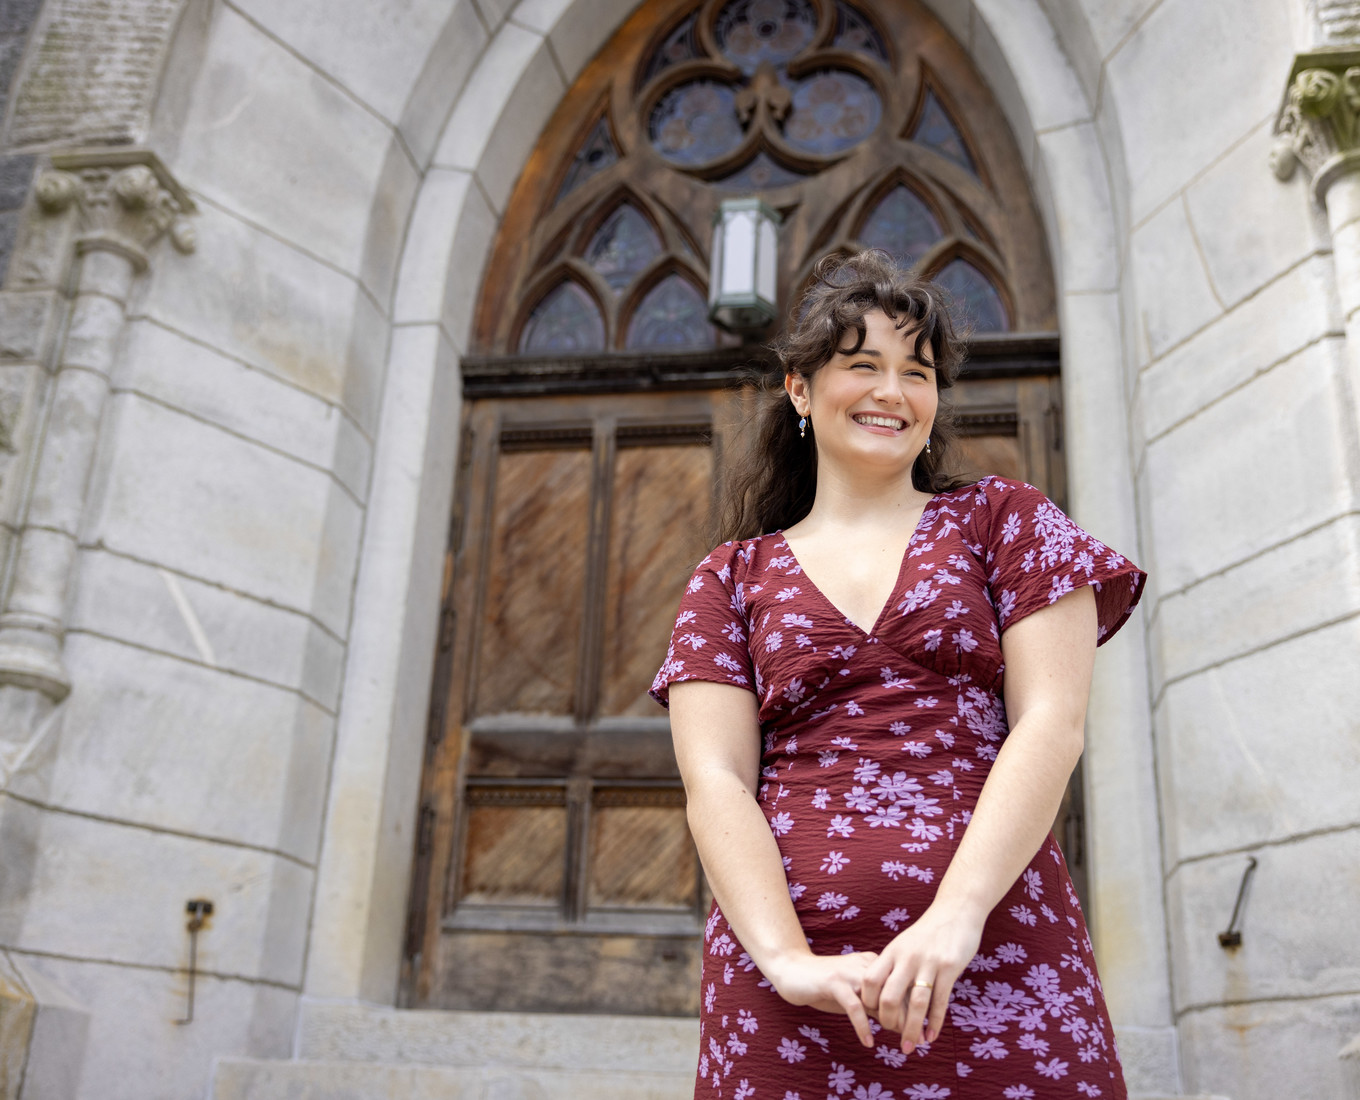 Smiling woman stands on church outside stairs